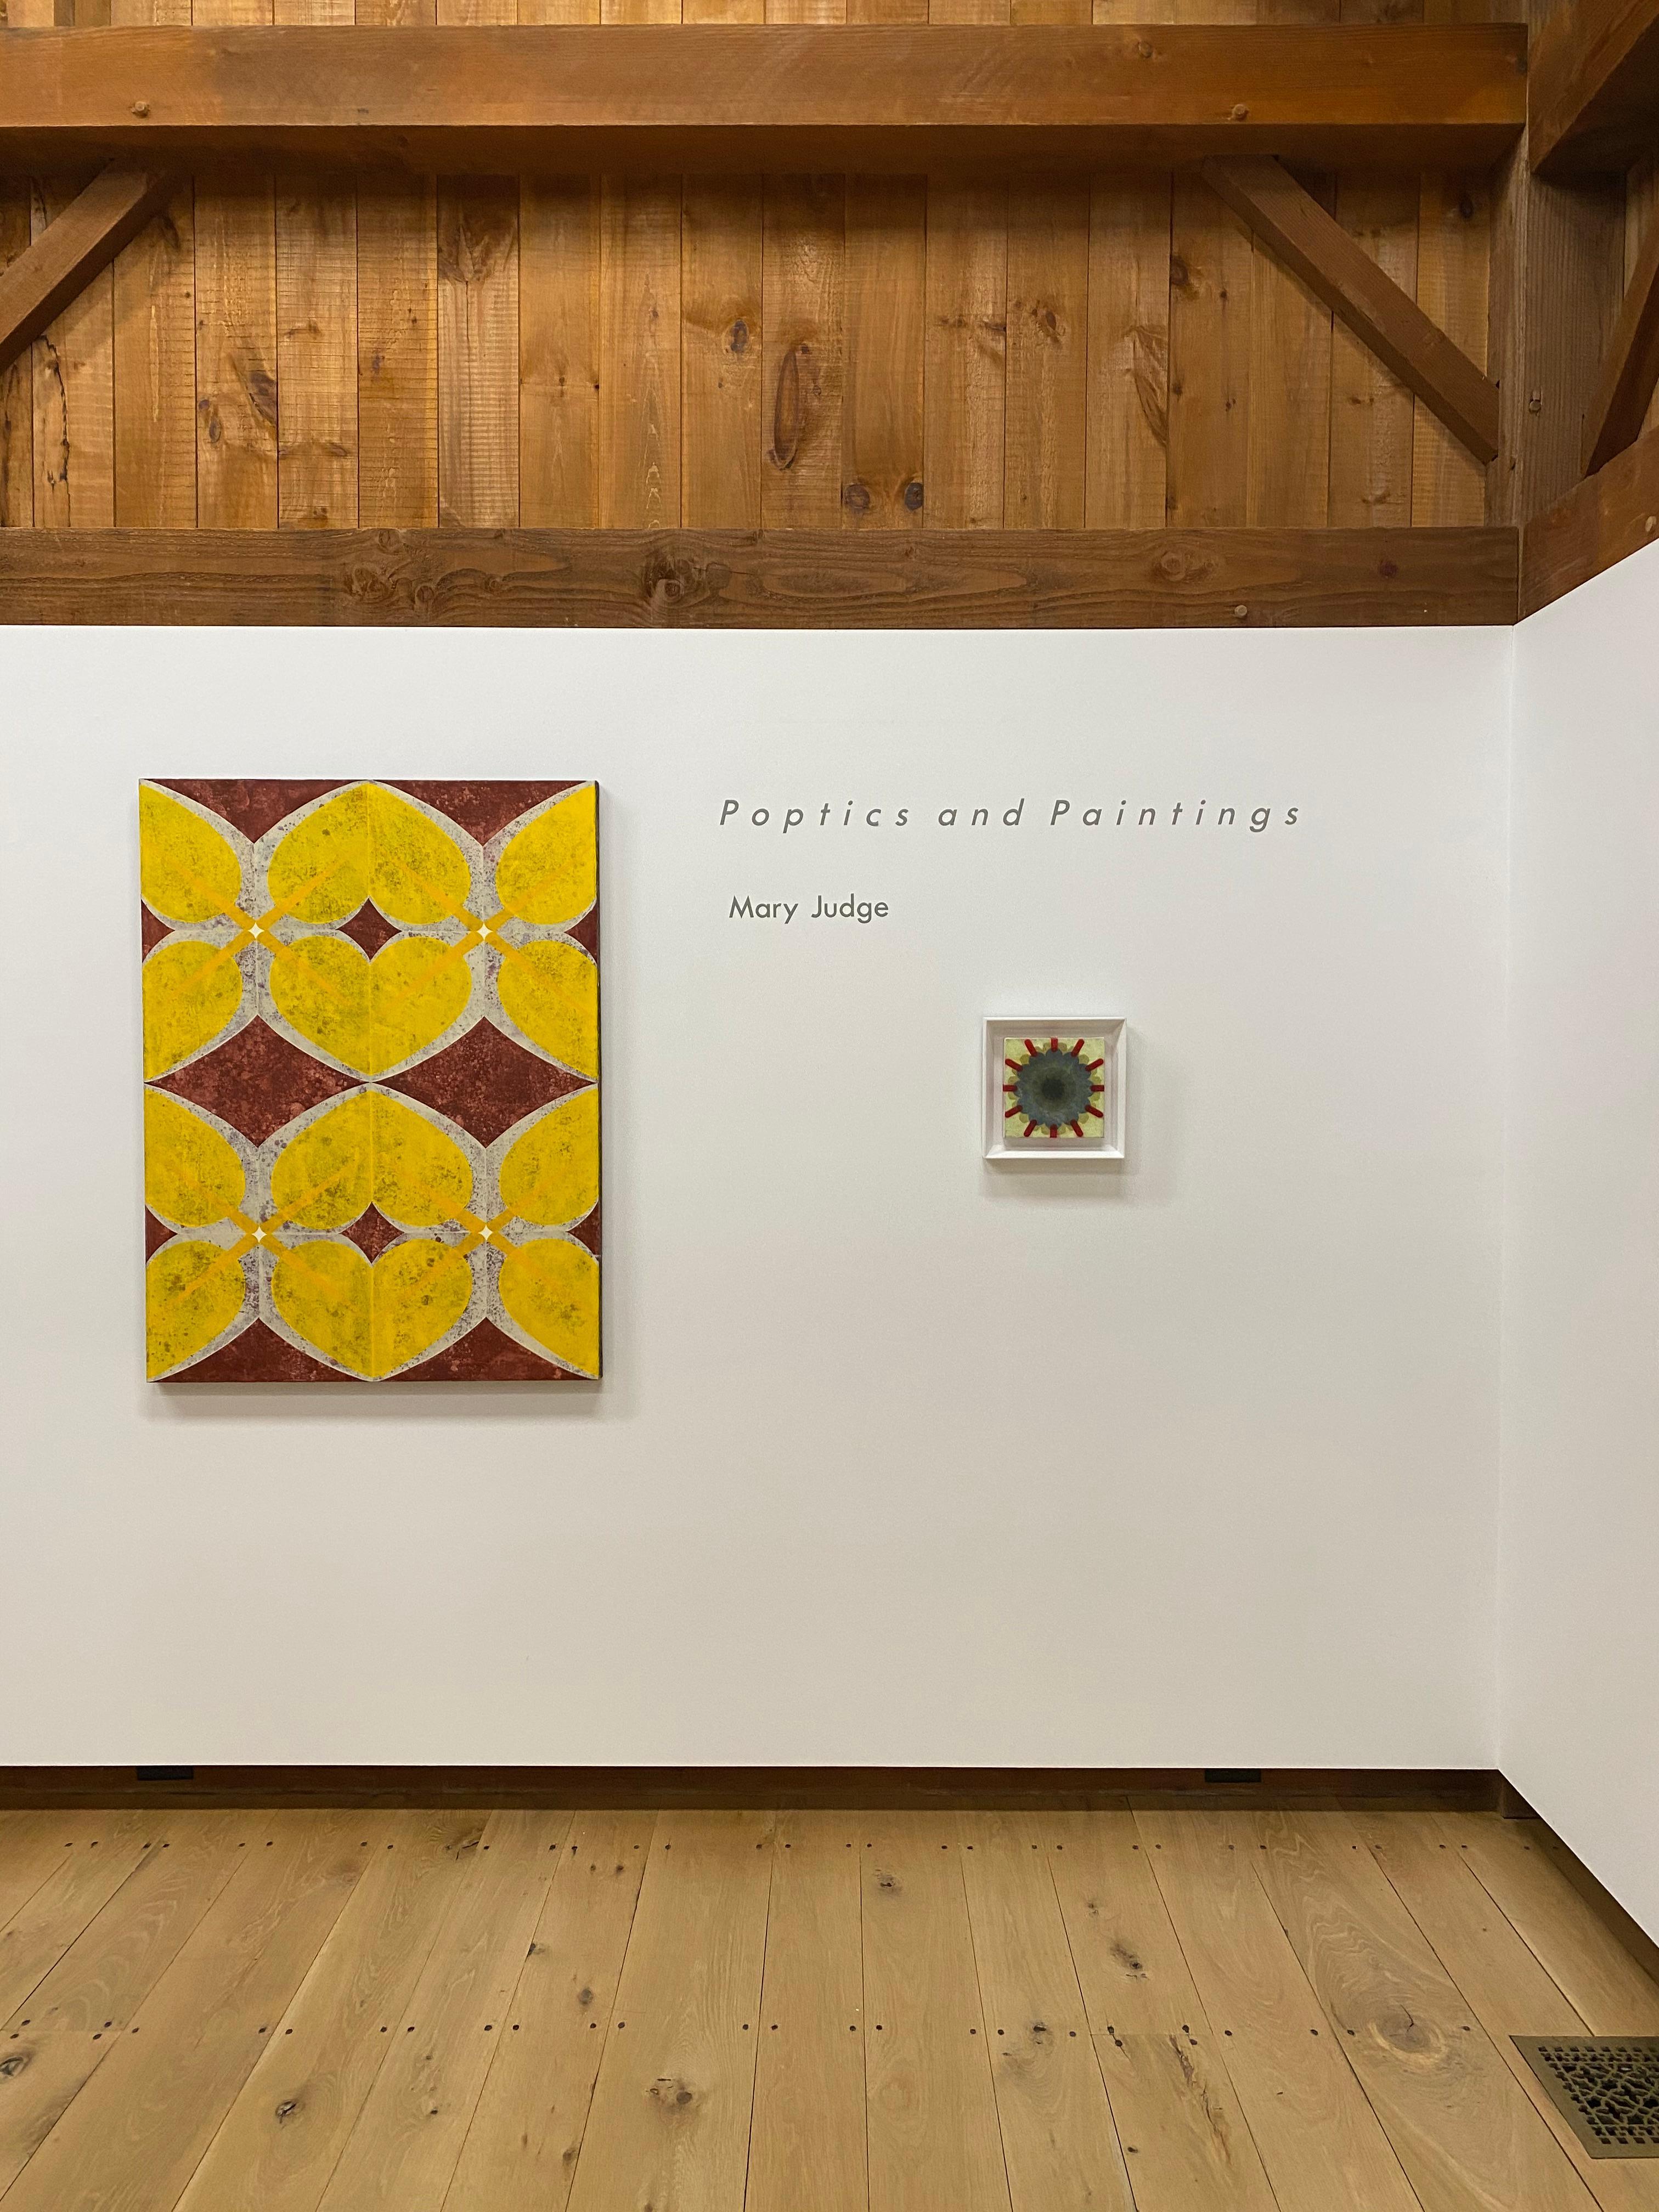 A yellow background is vibrant and bright, offsetting a layered, eye-catching geometric pattern in white and berry red with a mottled surface. Signed, dated and titled on verso.

Mary Judge is an artist in love with Italian art and traditional